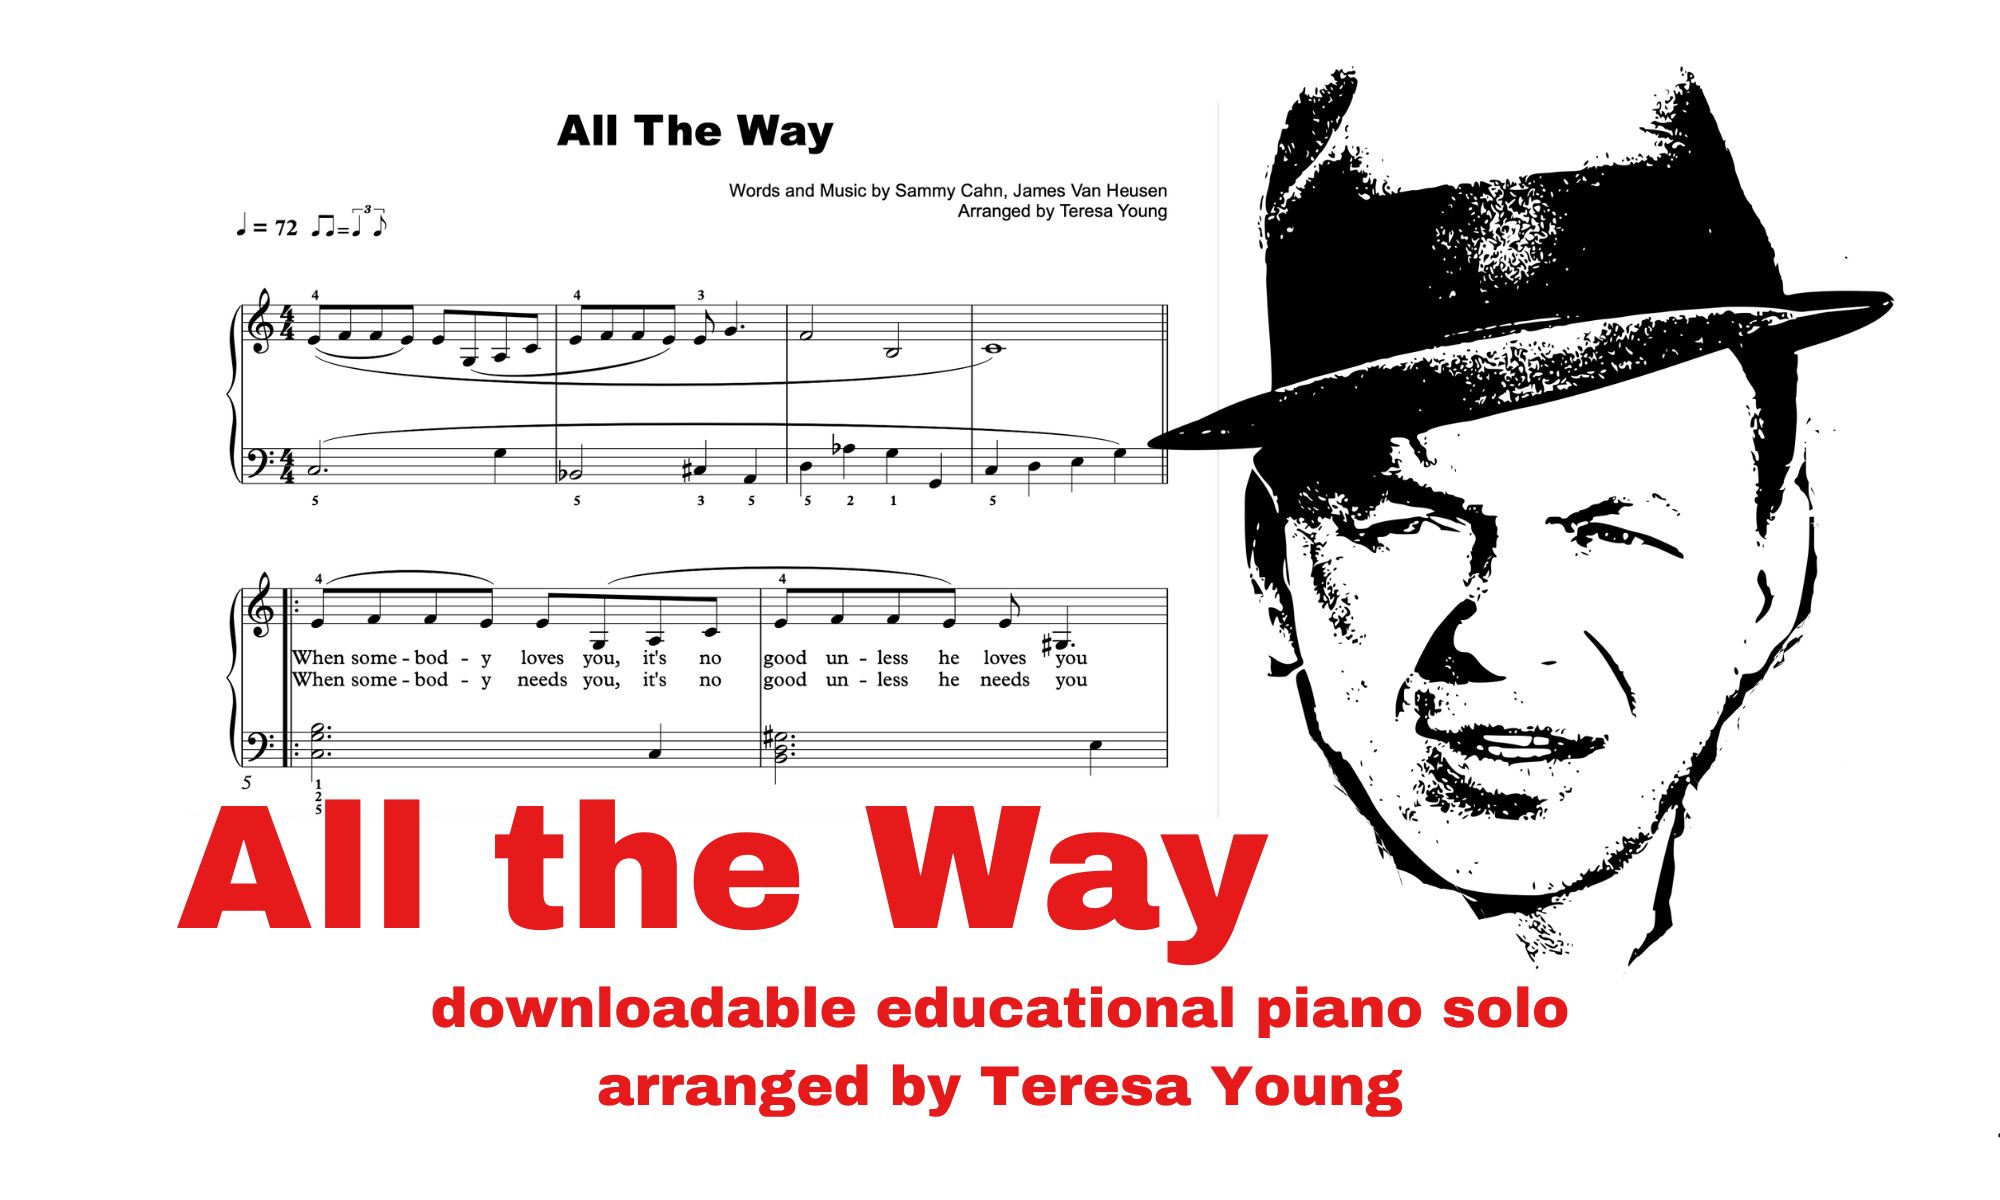 All the Way piano solo arr. by Teresa Young